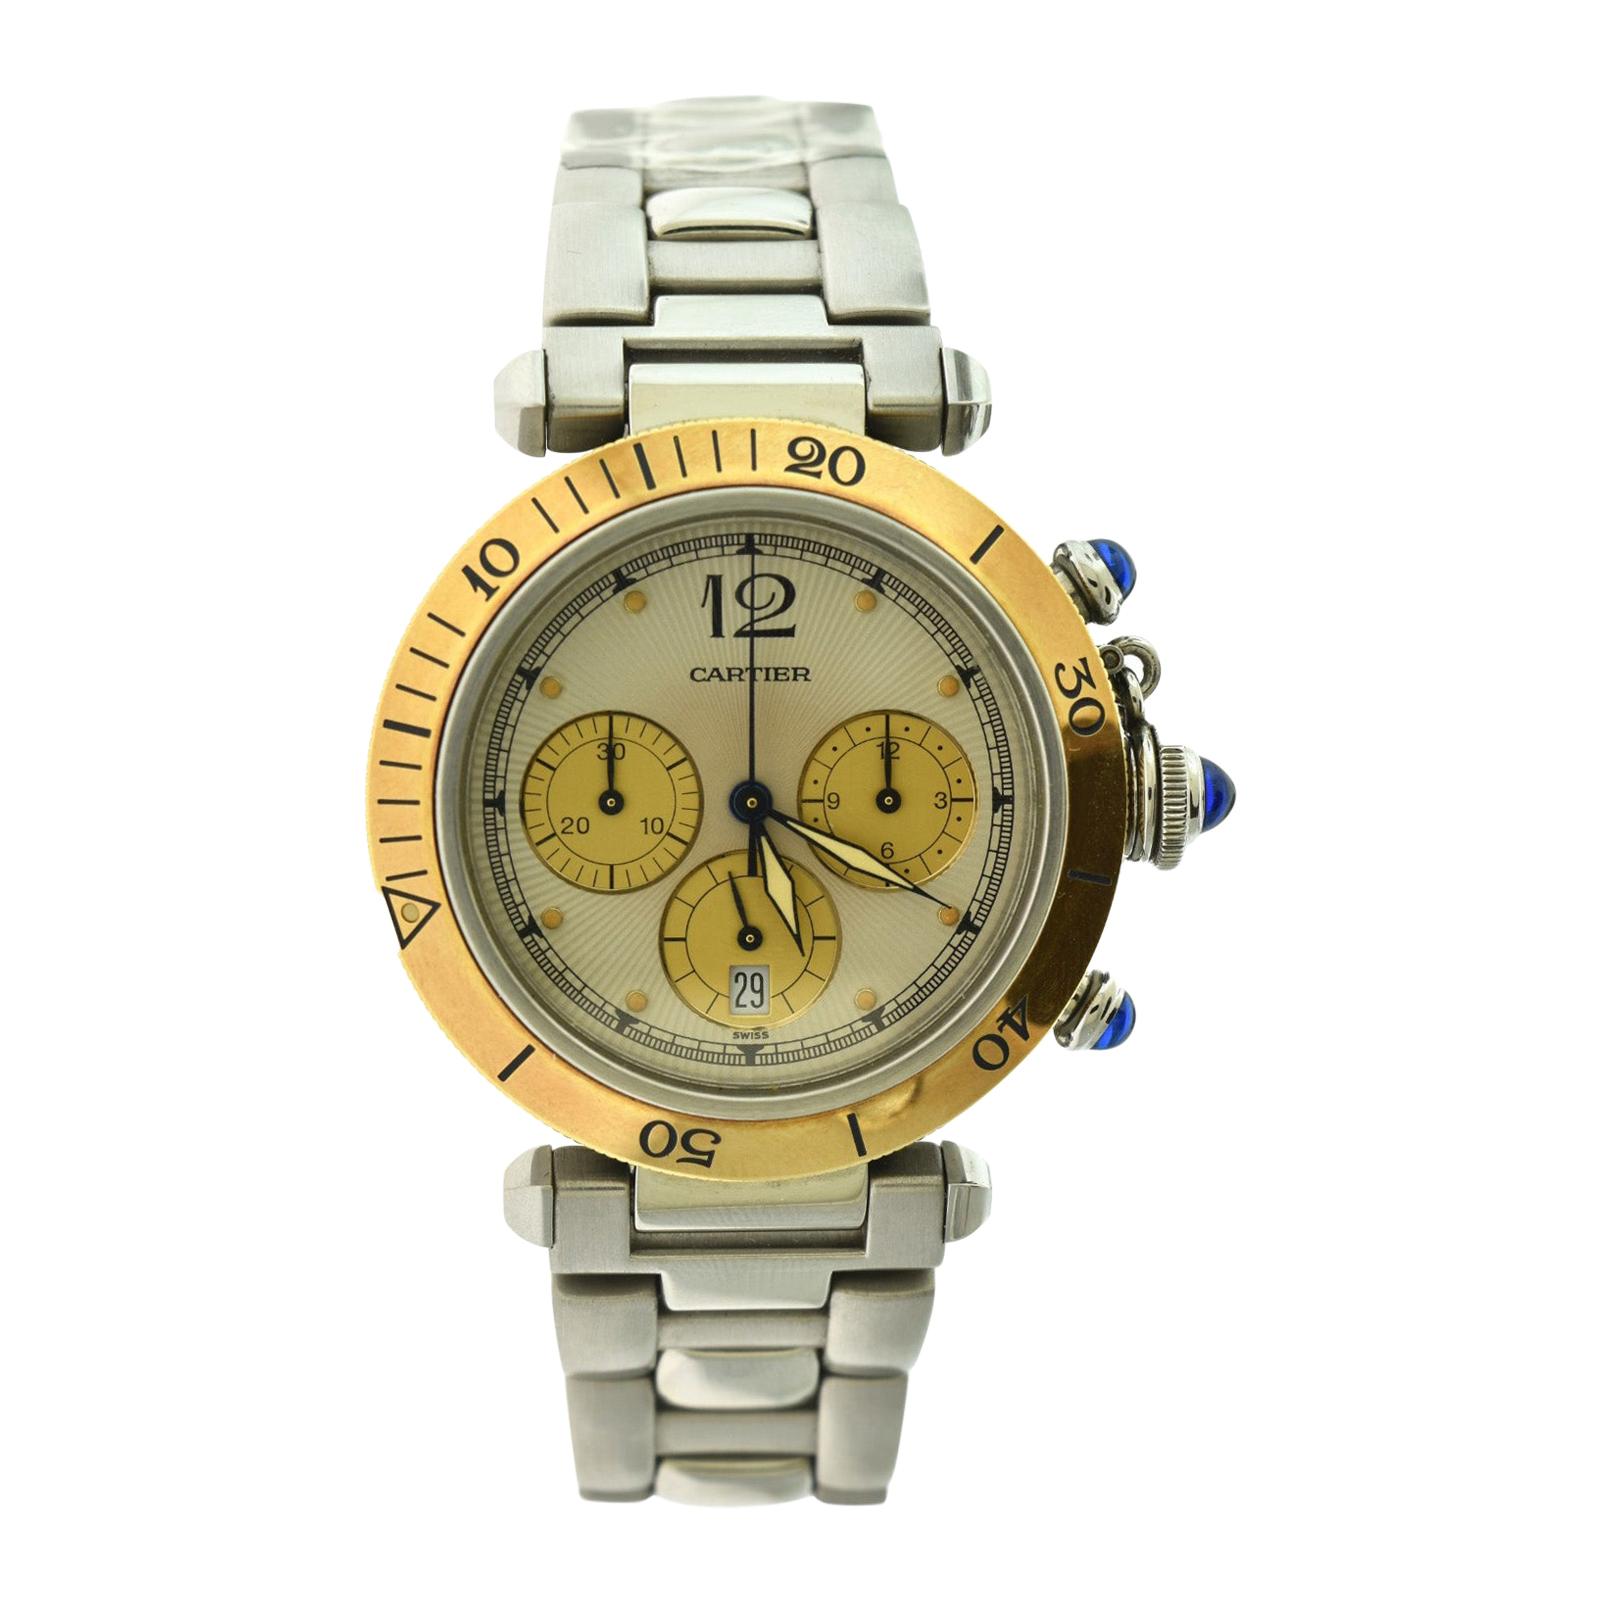 Cartier Pasha Chronograph 1032 Two Tone Steel, Yellow Gold Watch 'Y-41'